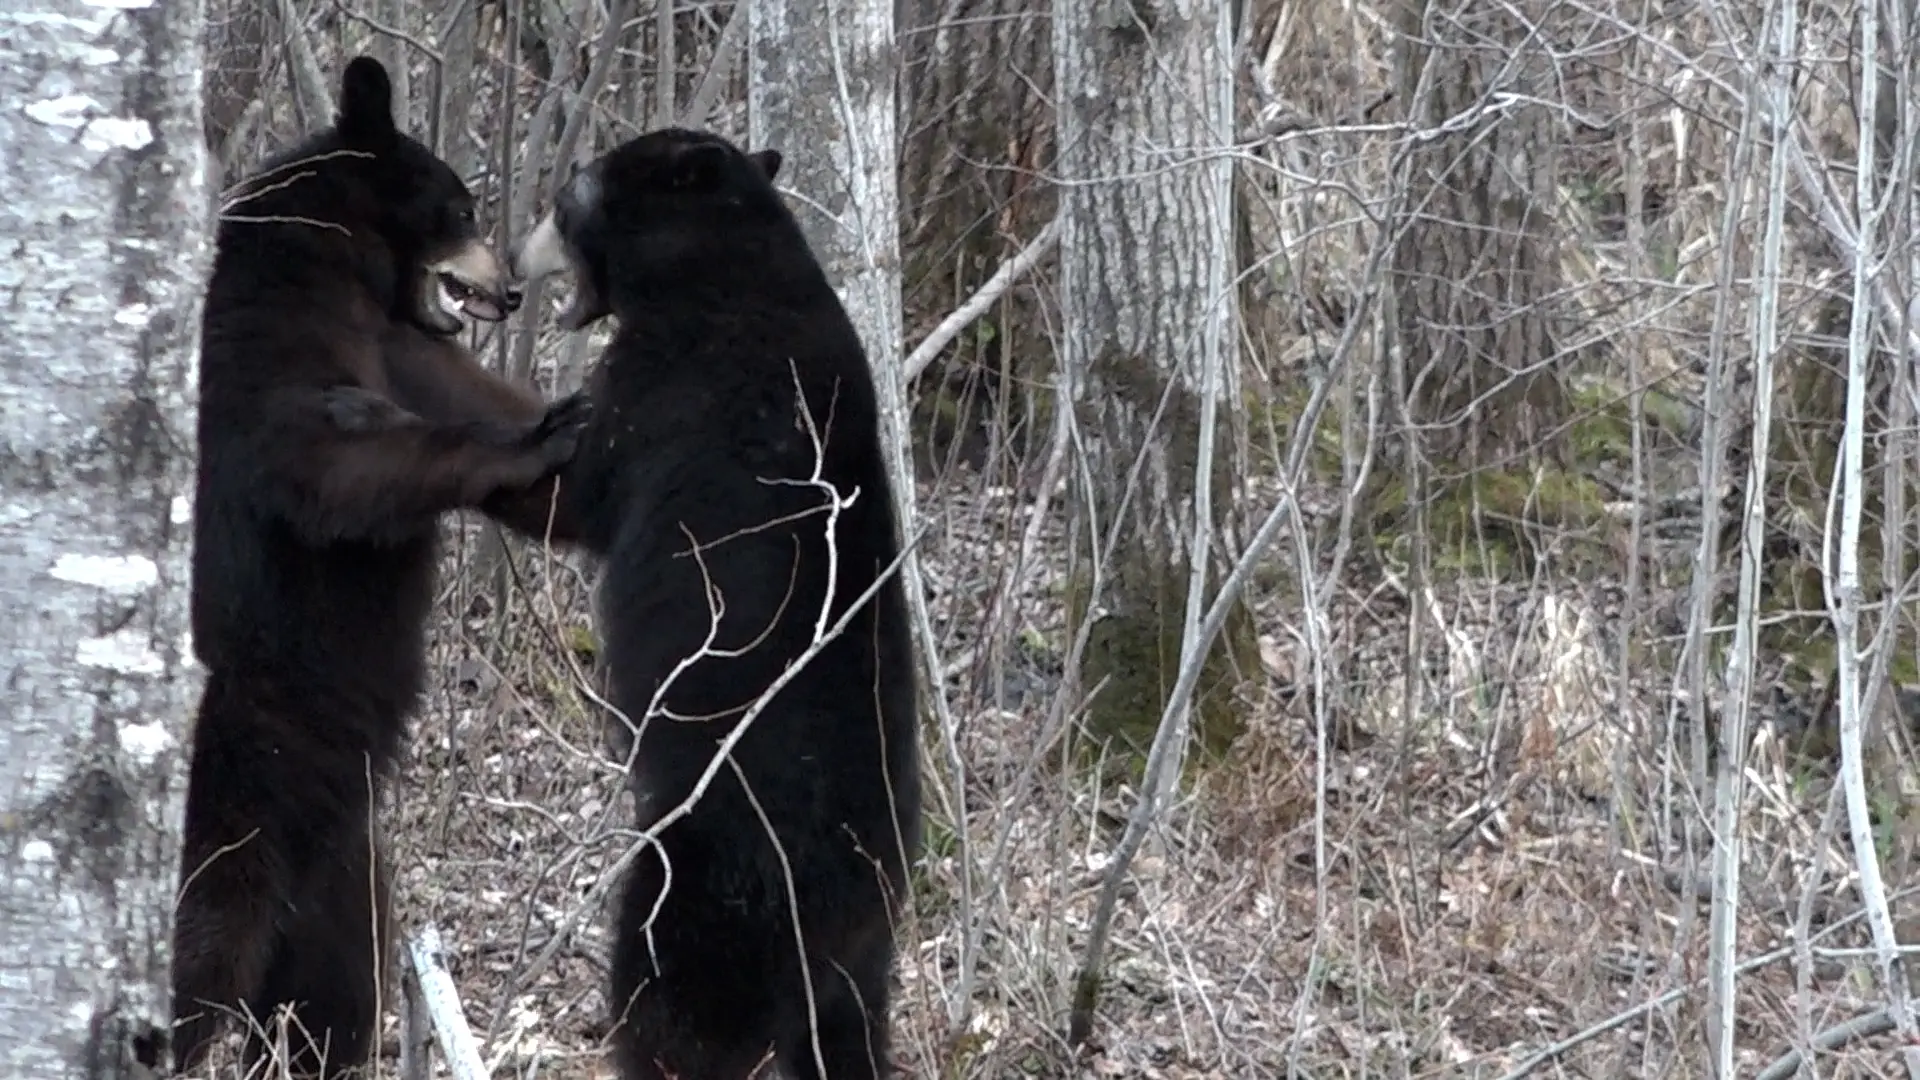 A bear is standing in the woods and has its head on another bear.